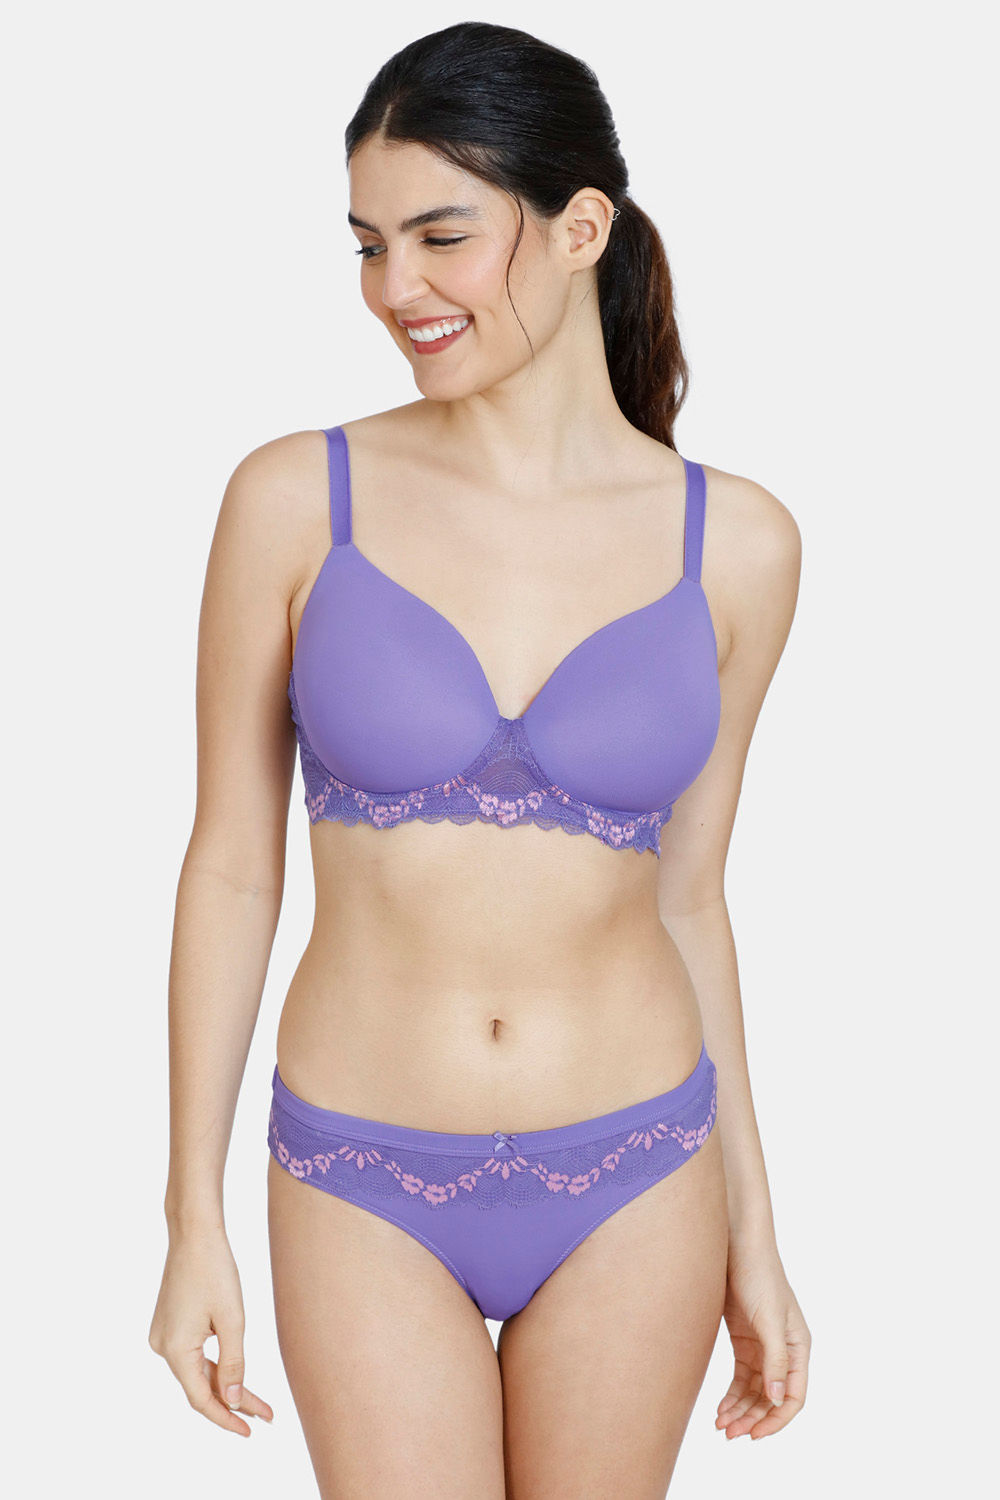 Women's Lingerie & Clothing Online in India (Page 7)